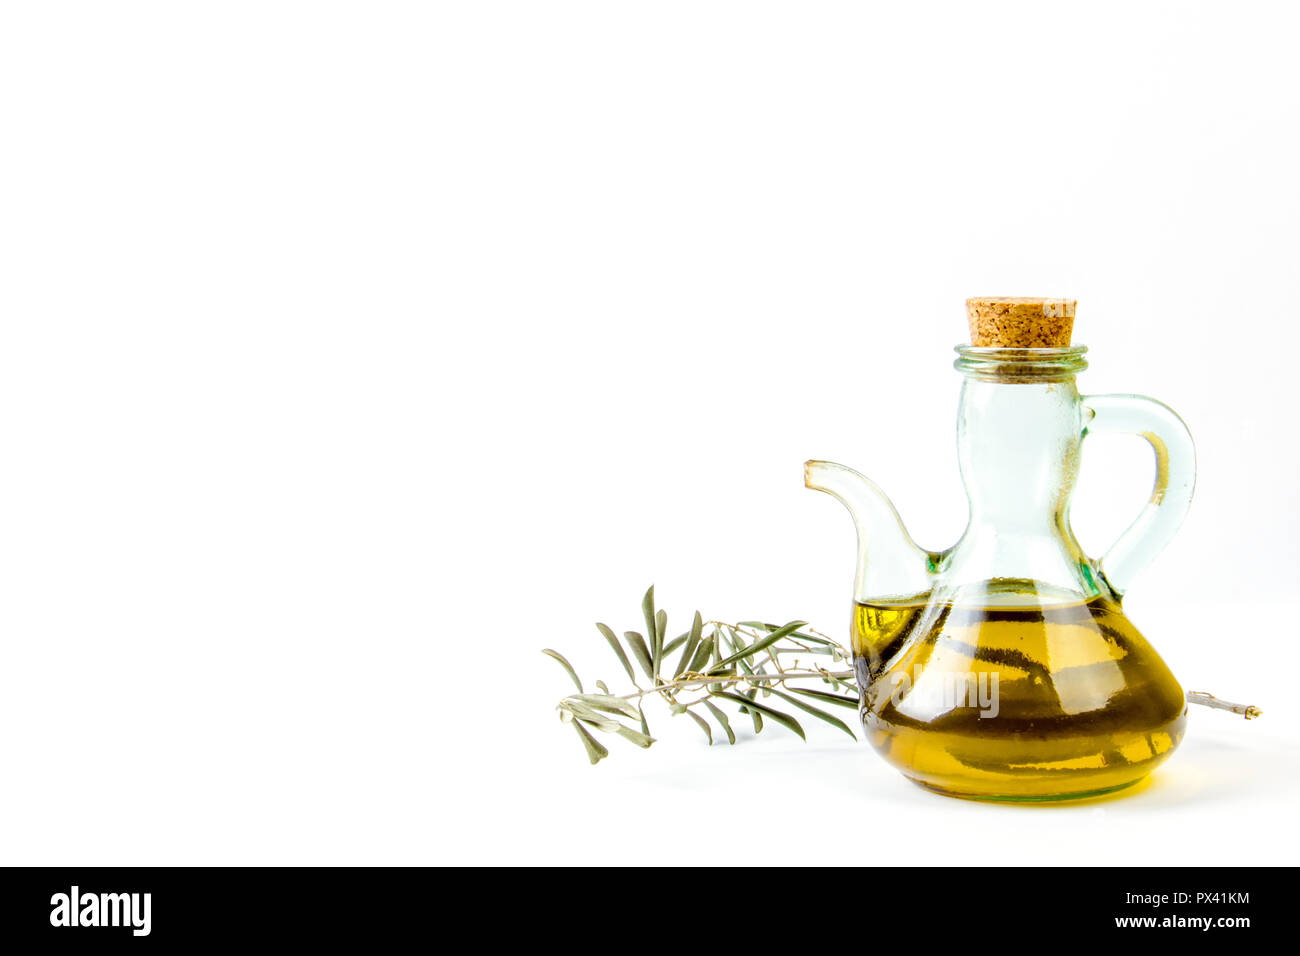 Olive oil glass bottle with an olive tree branch isolated on white background Stock Photo